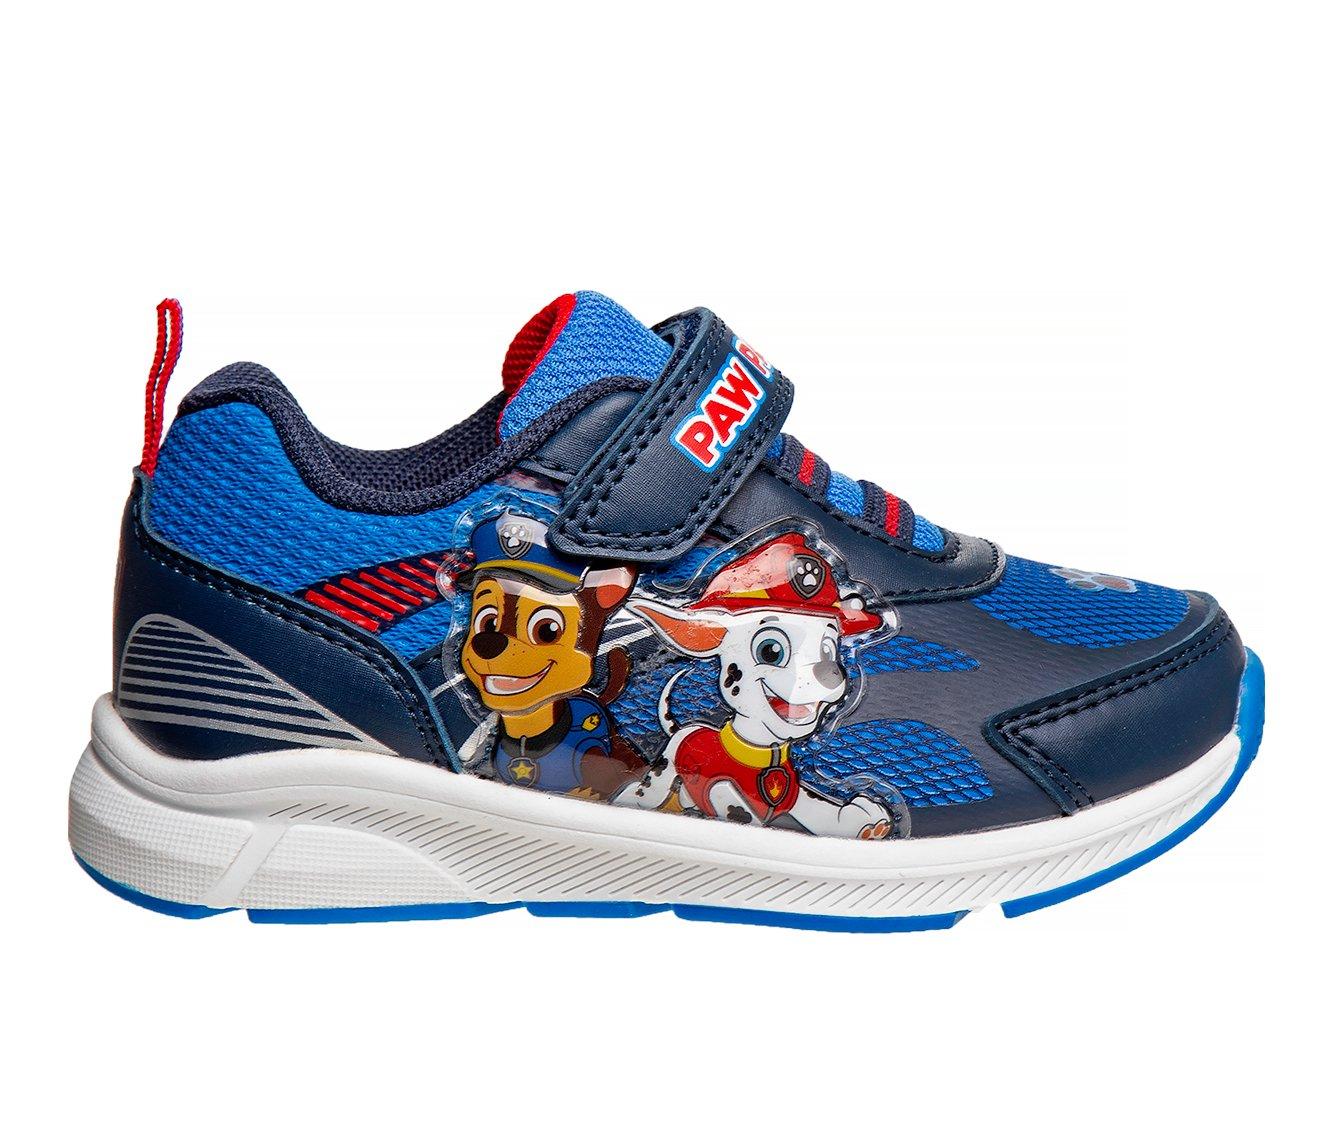 Boys' Nickelodeon Toddler & Little Kid CH88822C Paw Patrol Light-Up Sneakers